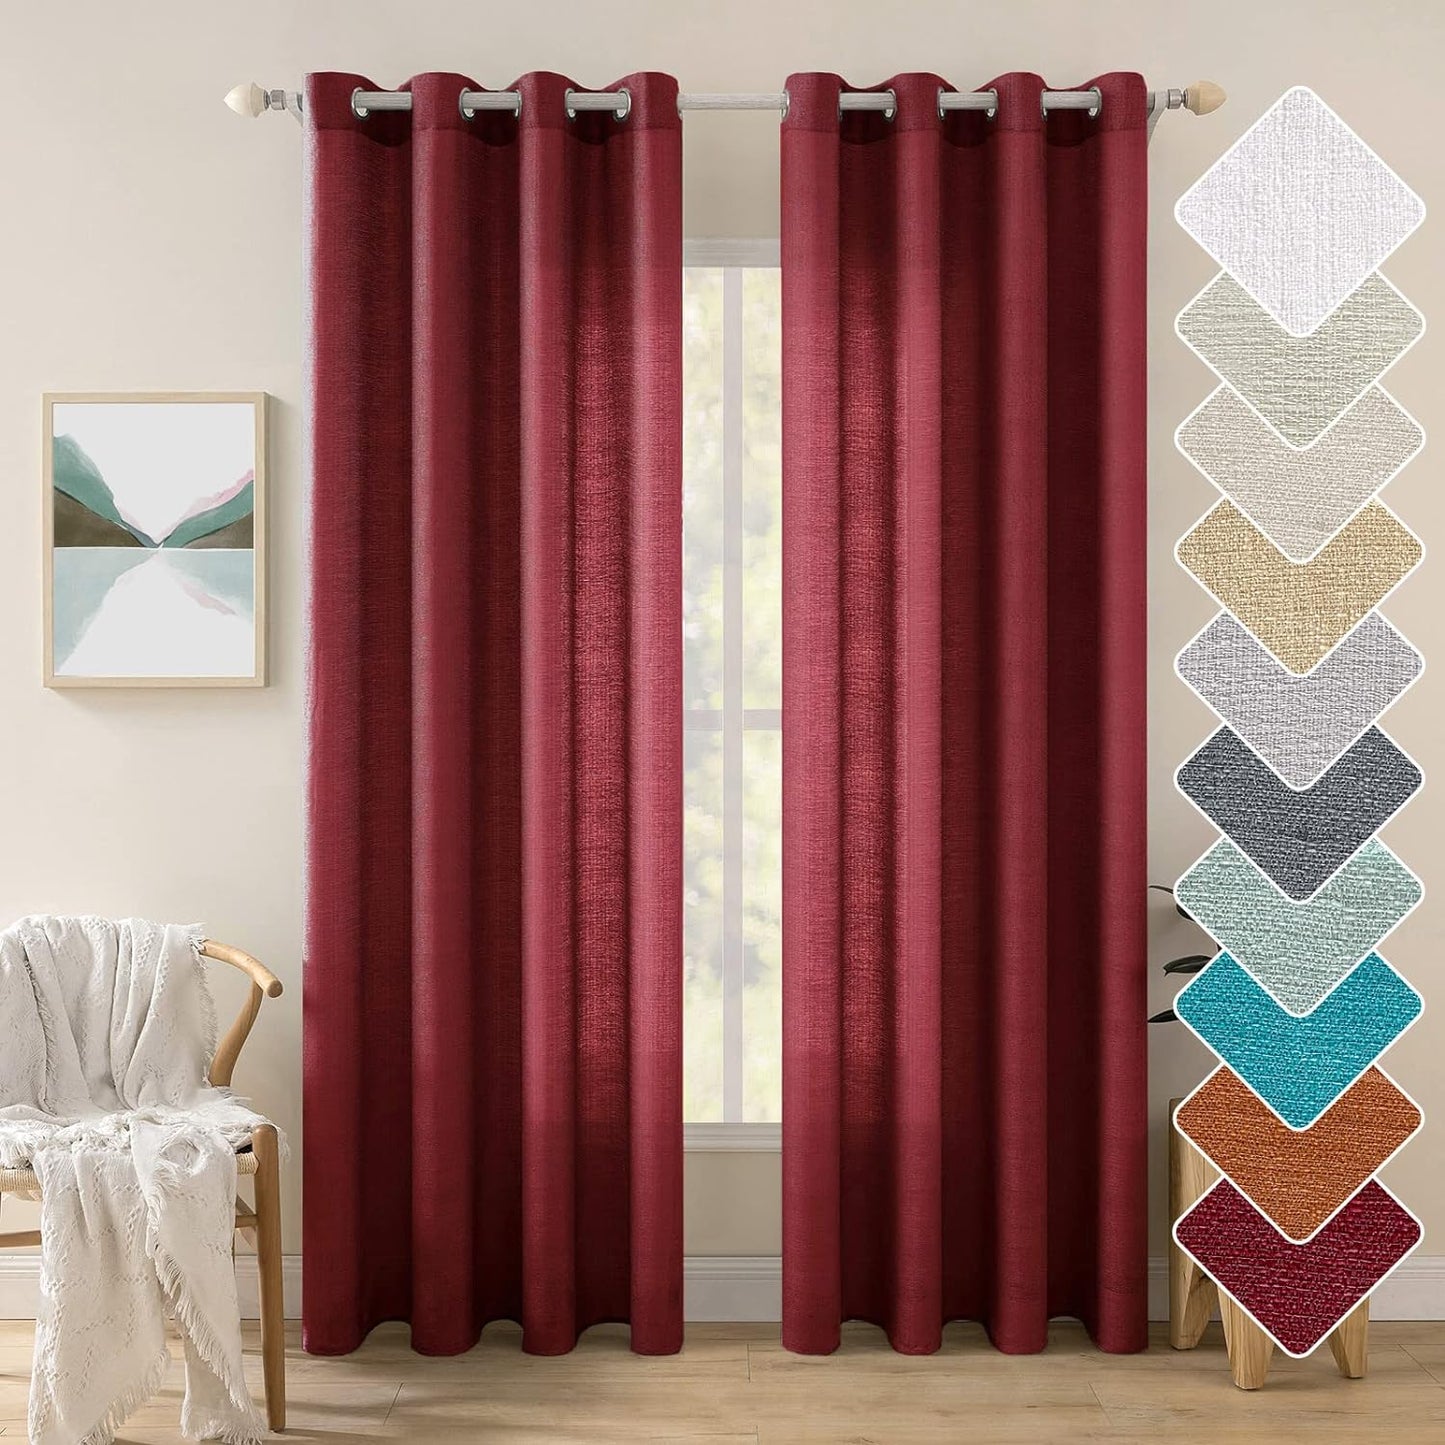 MIULEE Burnt Orange Linen Semi Sheer Curtains 2 Panels for Living Room Bedroom Linen Textured Light Filtering Privacy Window Curtains Terracotta Grommet Drapes Rust Boho Fall Decor W 52 X L 84 Inches  MIULEE Grommet | Burgundy Red W52 X L96 